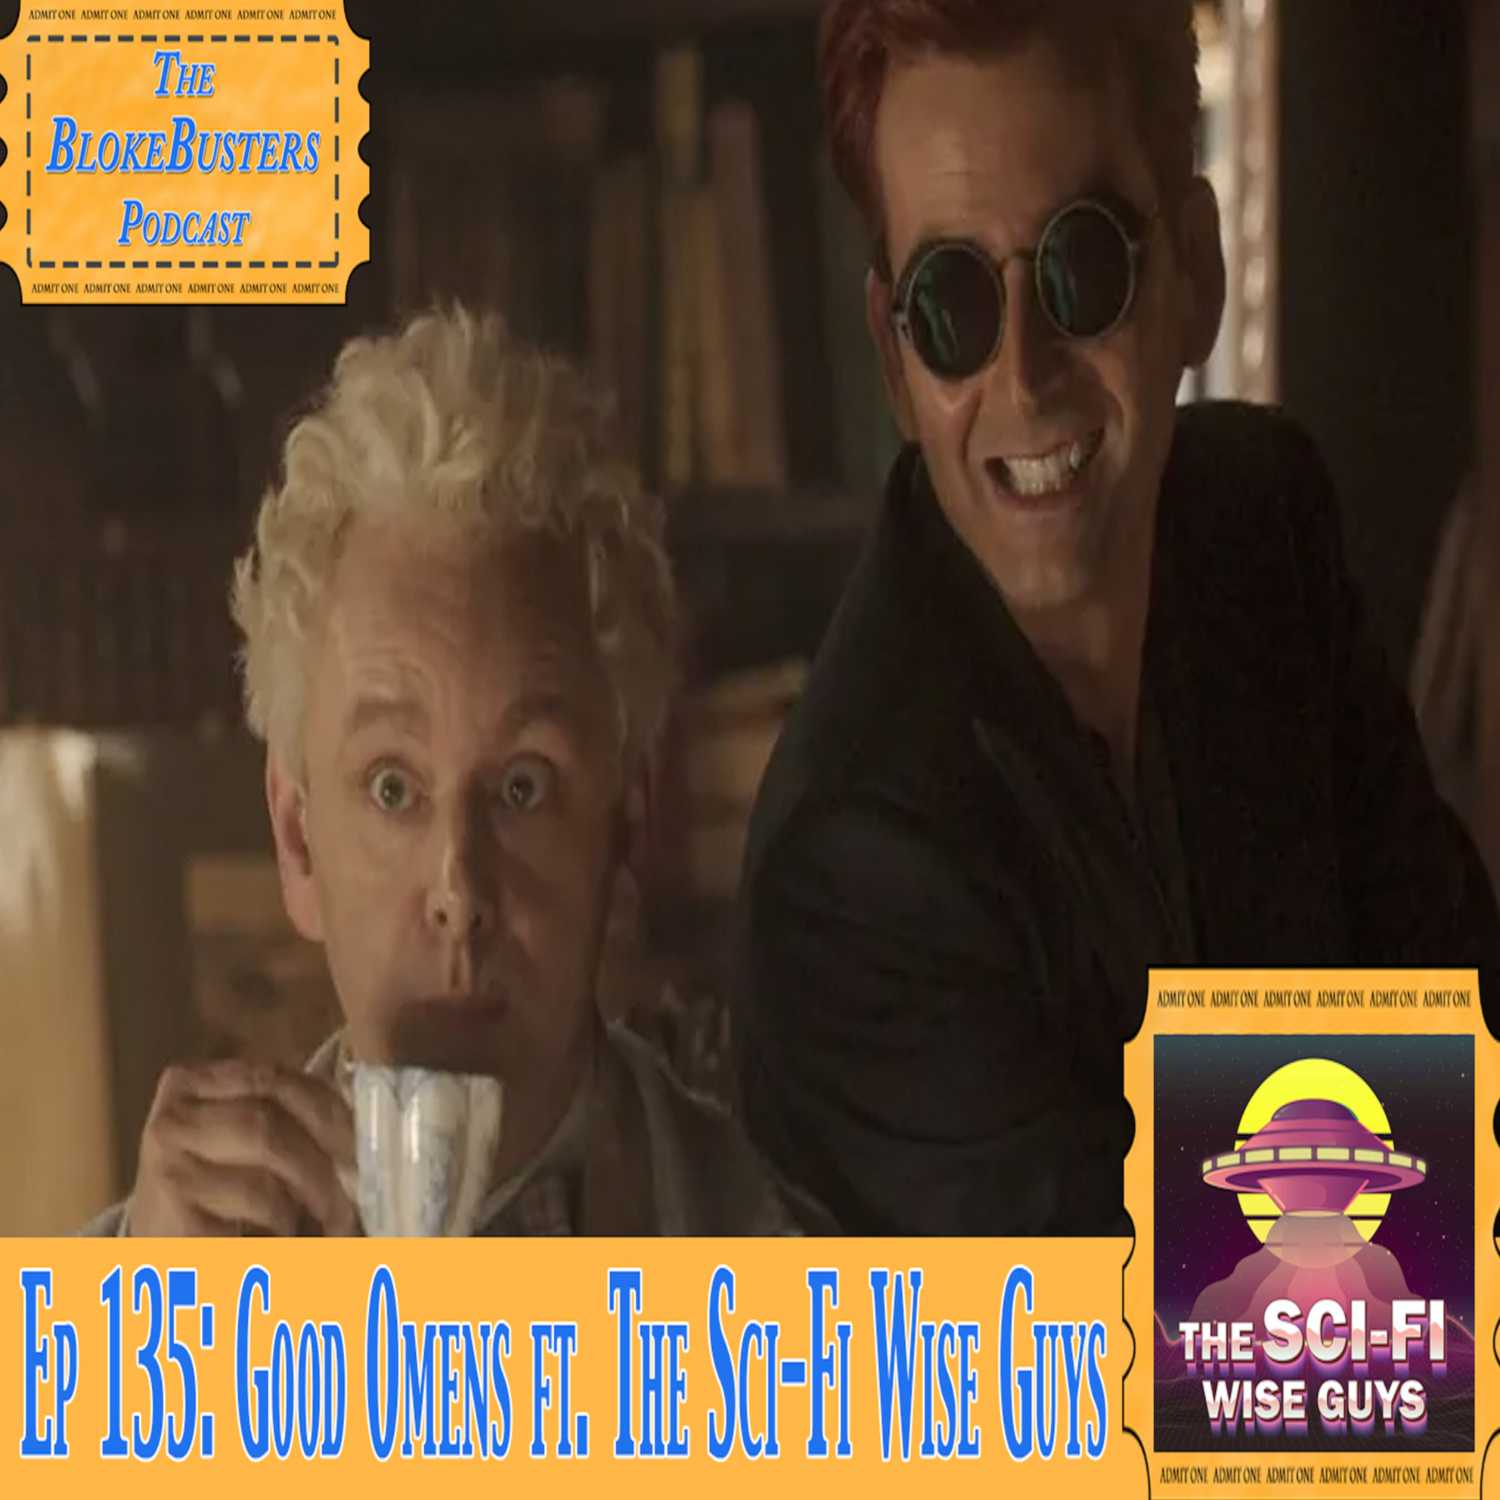 Review 135: Good Omens or ”To The World!”